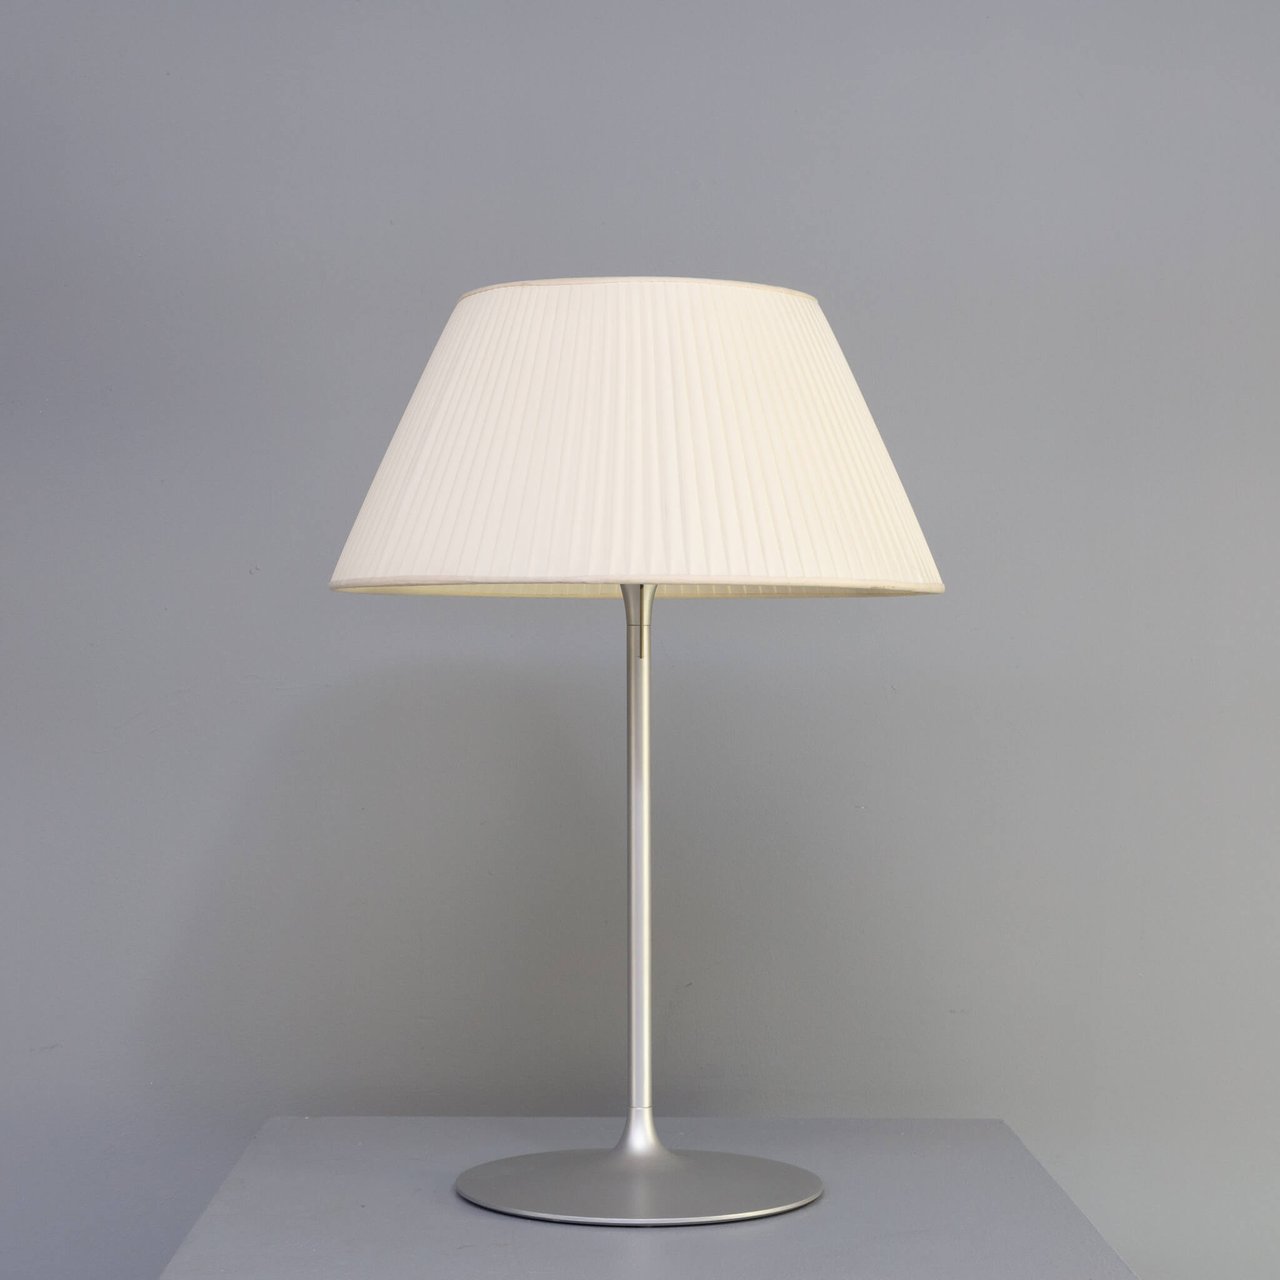 2x Philippe Starck ‘romeo’ table lamp for Flos